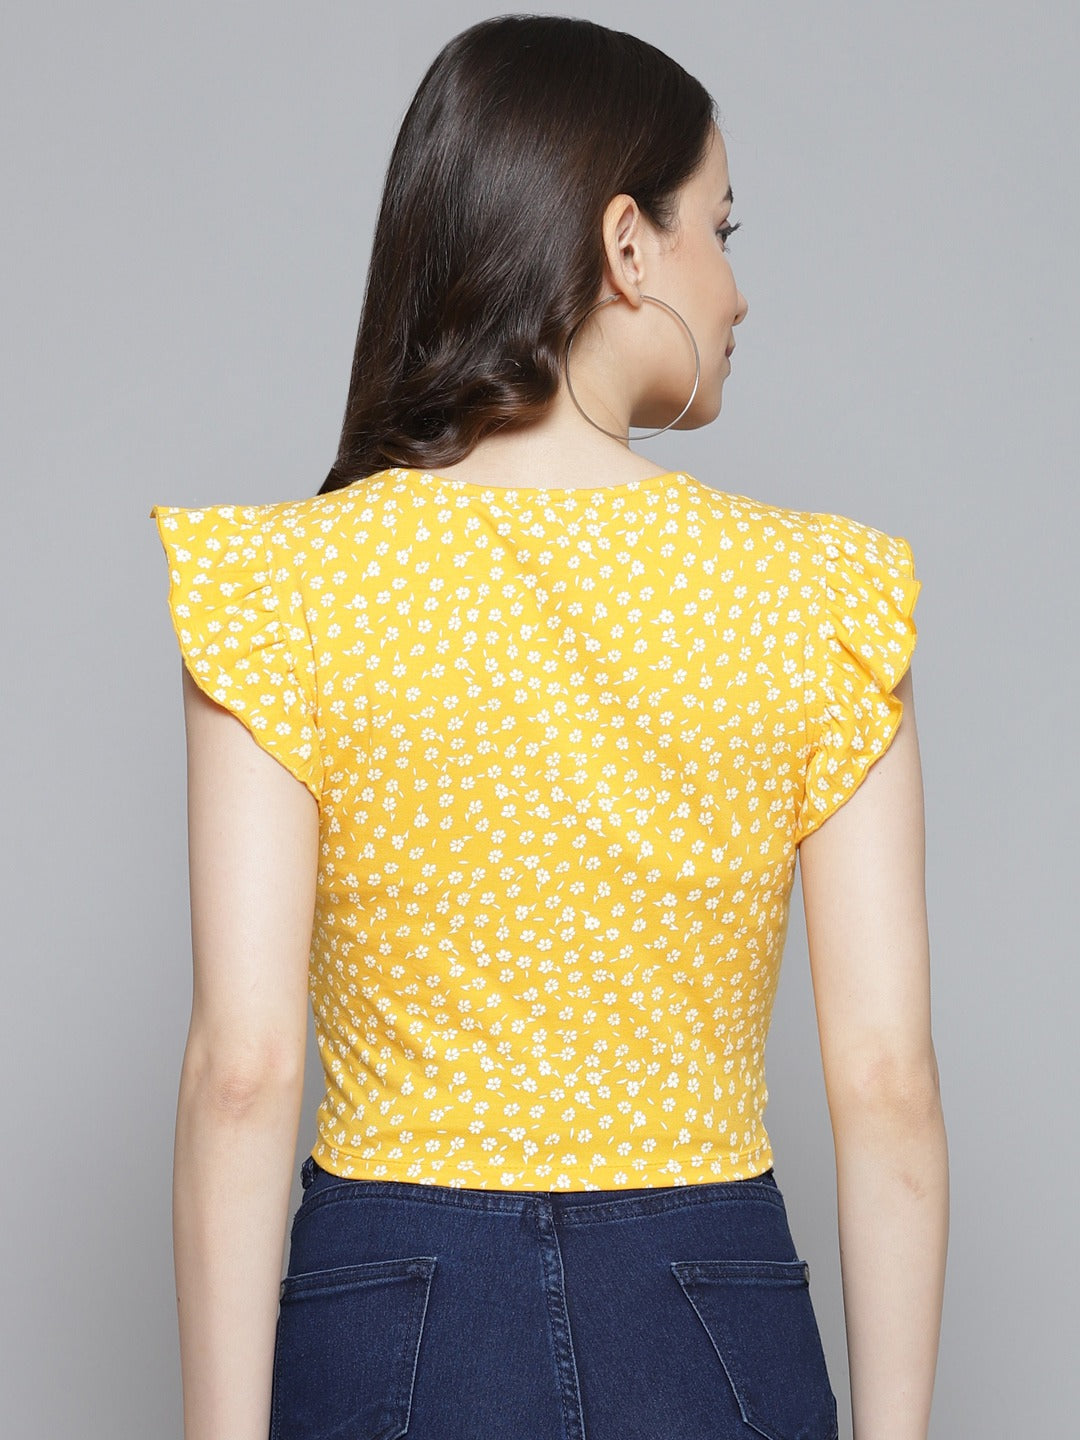 Mustard Yellow & White Ditsy Floral Print Ruched Fitted Crop Top